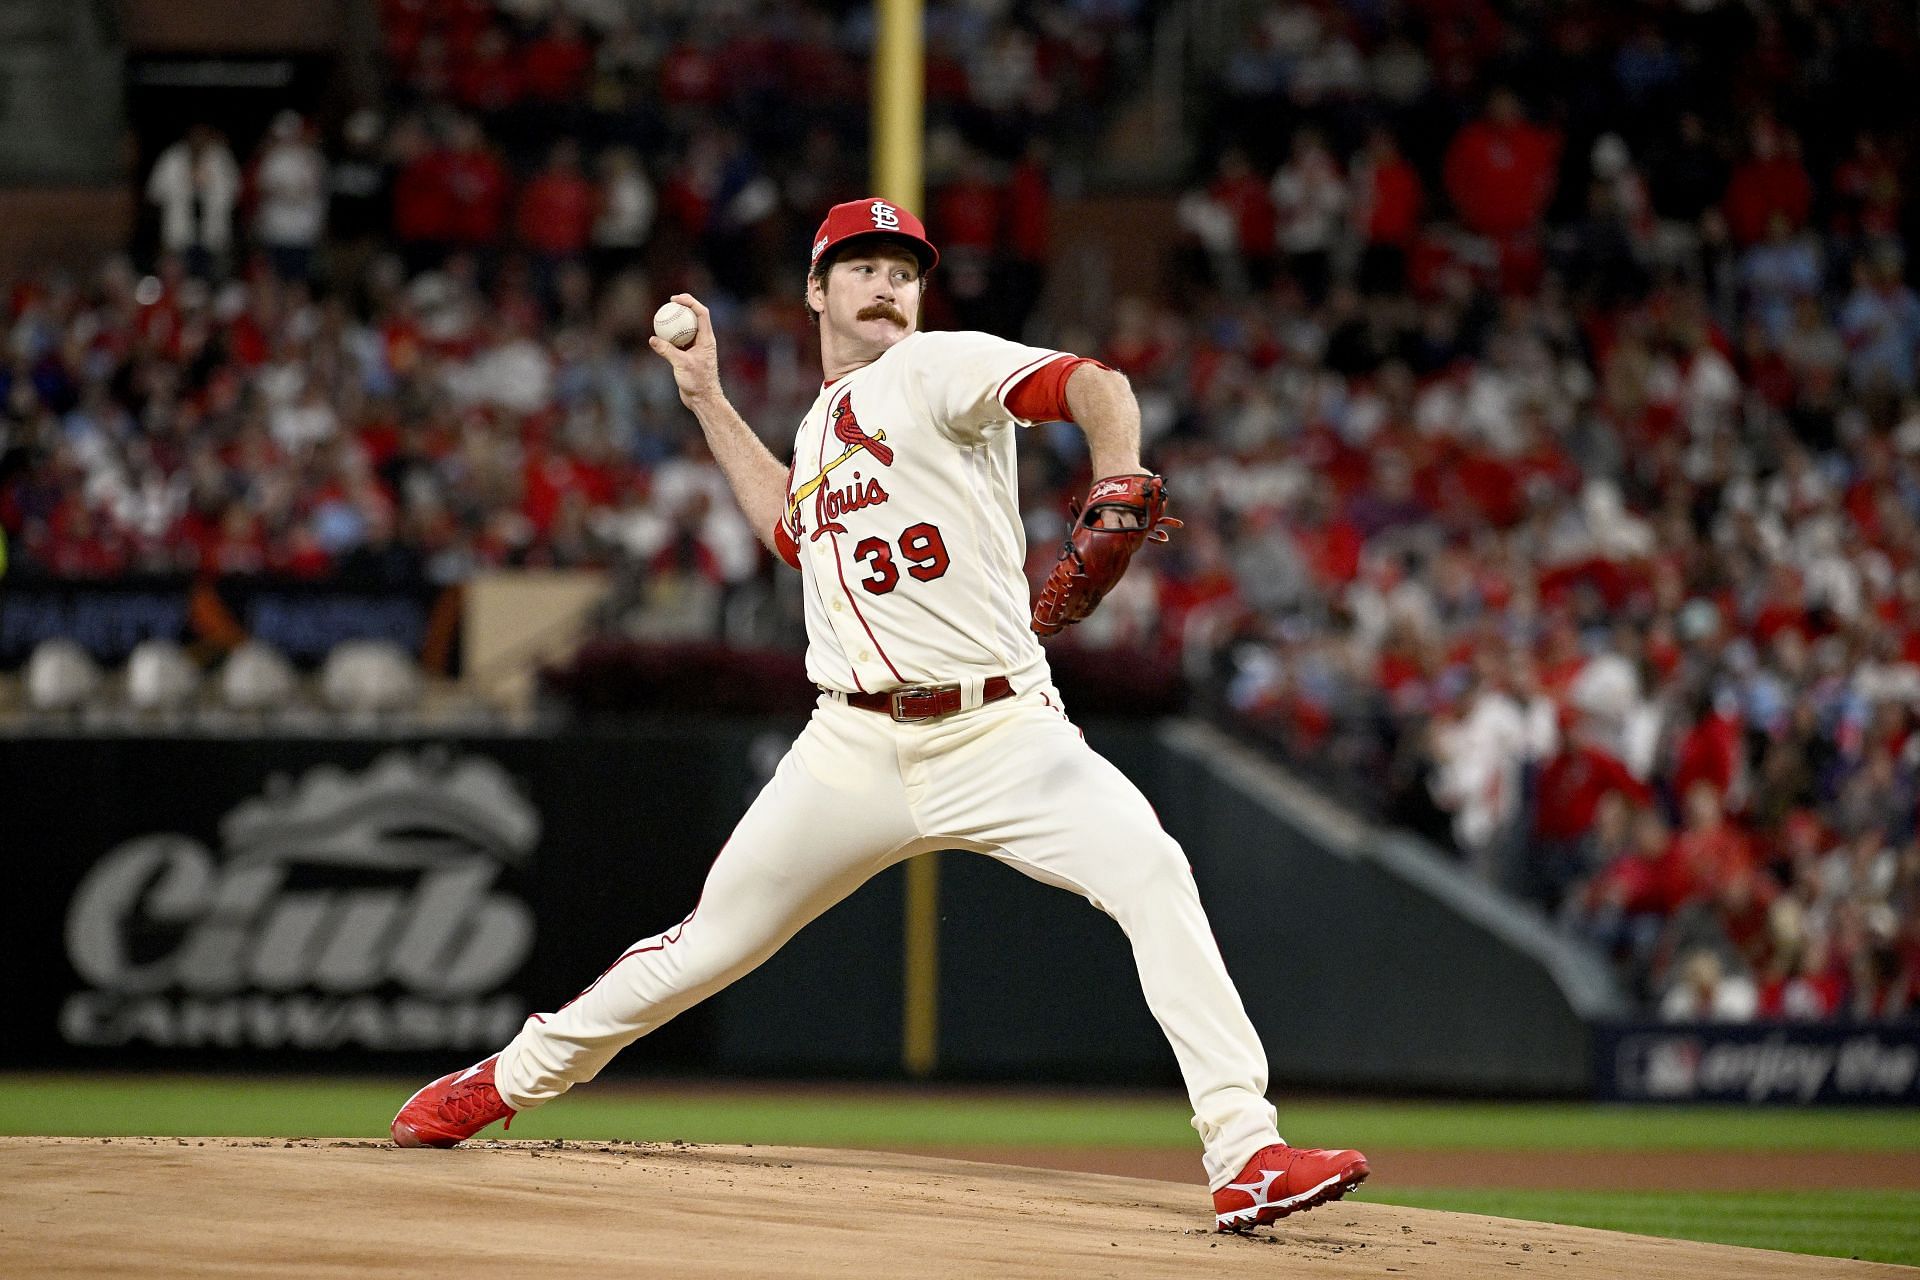 Miles Mikolas is dead set to pitch in the WBC '23 and later